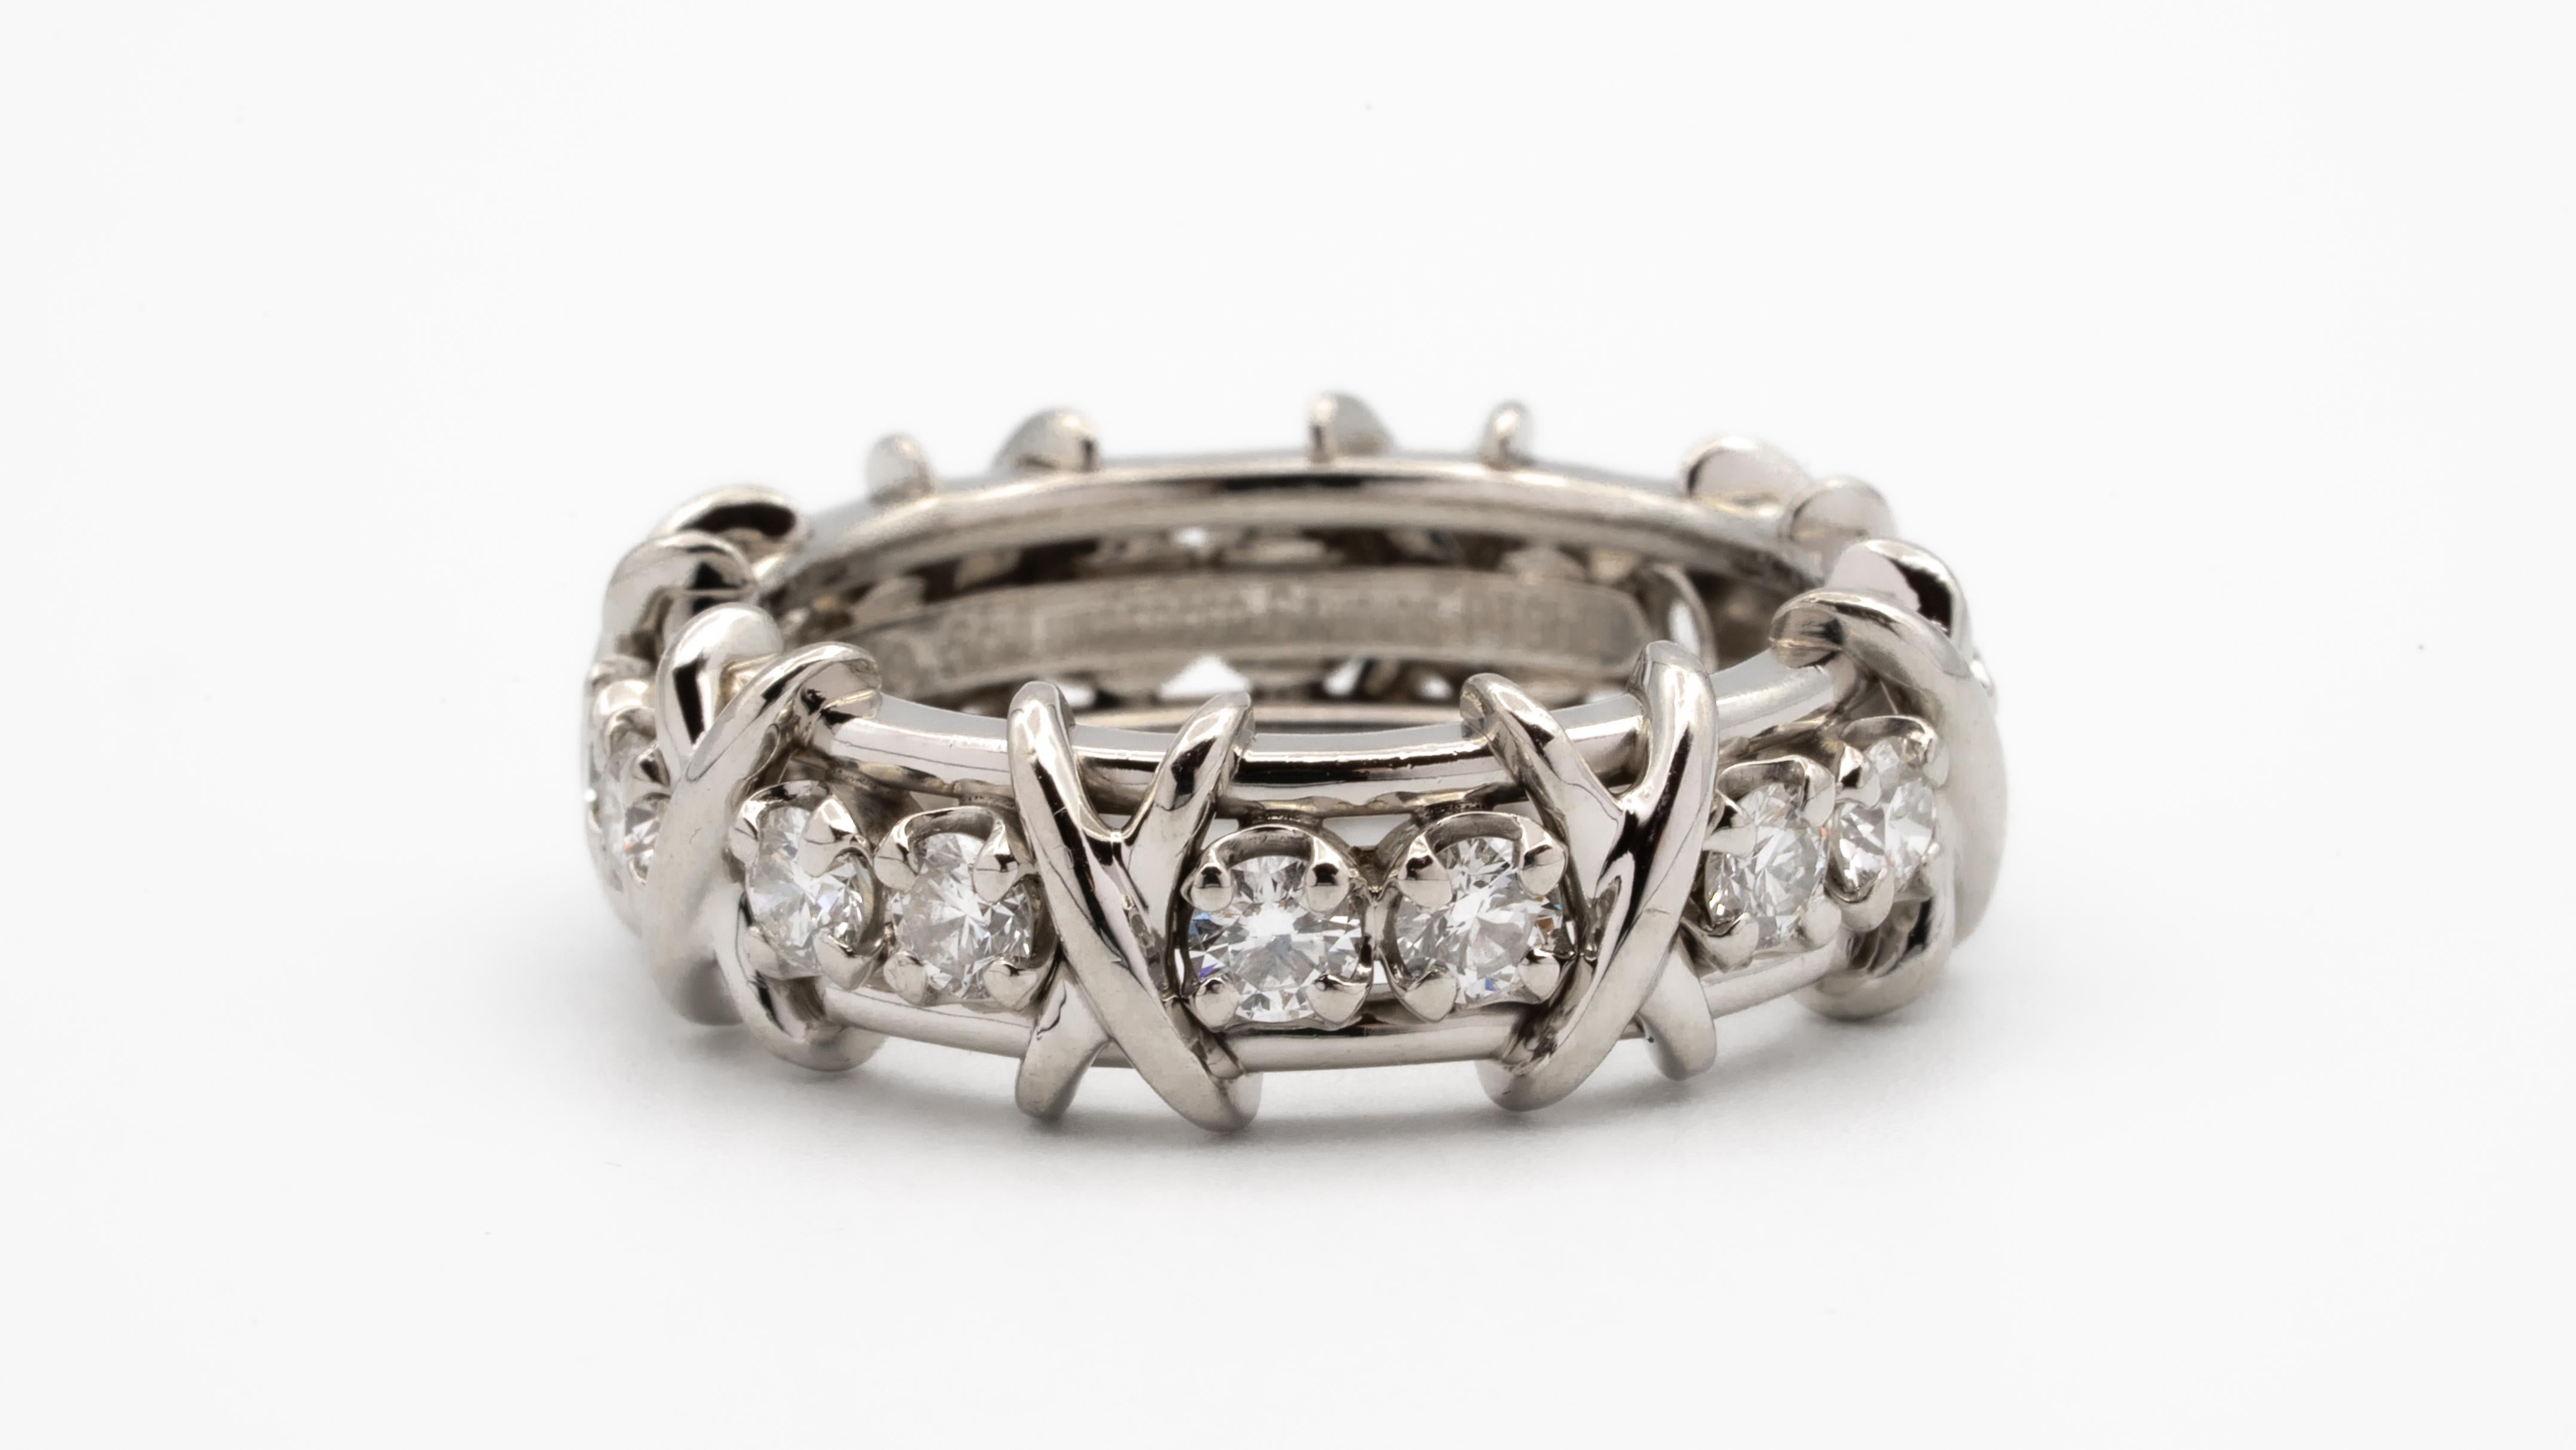 Tiffany & Co. Schlumberger Studios 16 stone ring, finely crafted in all Platinum with 16 round brilliant cut diamonds weighing 1.15 carats total weight approximately. F color , very fine VS clarity.

Stamp: Tiffany & Co Schlumberger Studios,